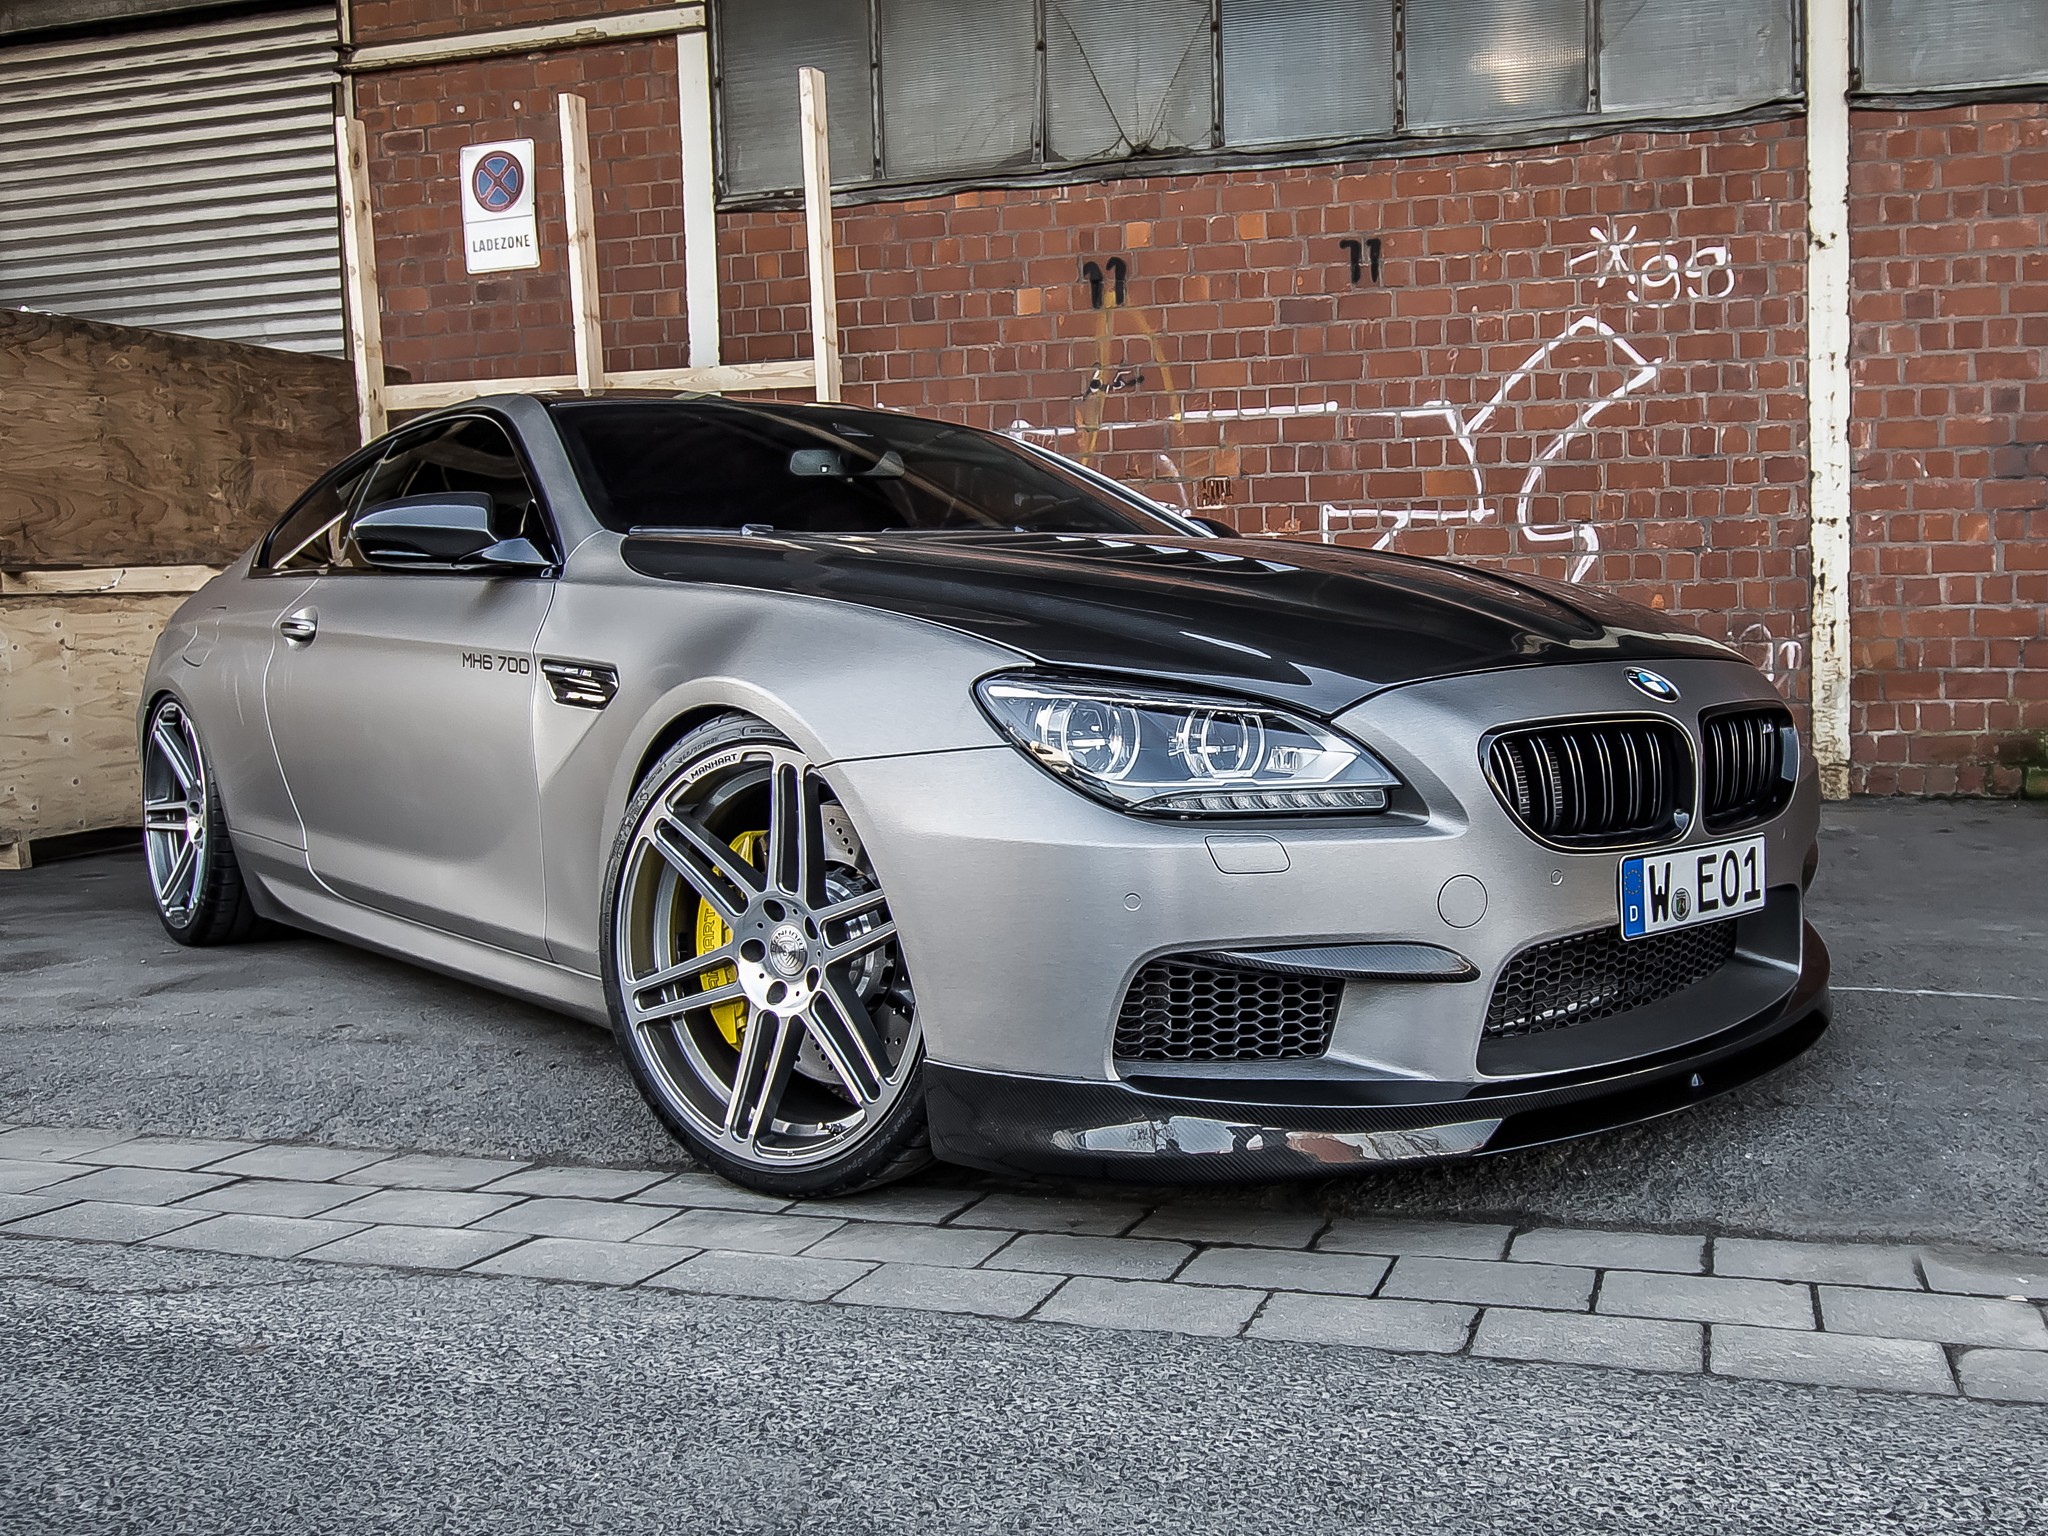 2013, Manhart racing, Bmw, Mh6, 700, Coupe,  f13 , Tuning Wallpaper